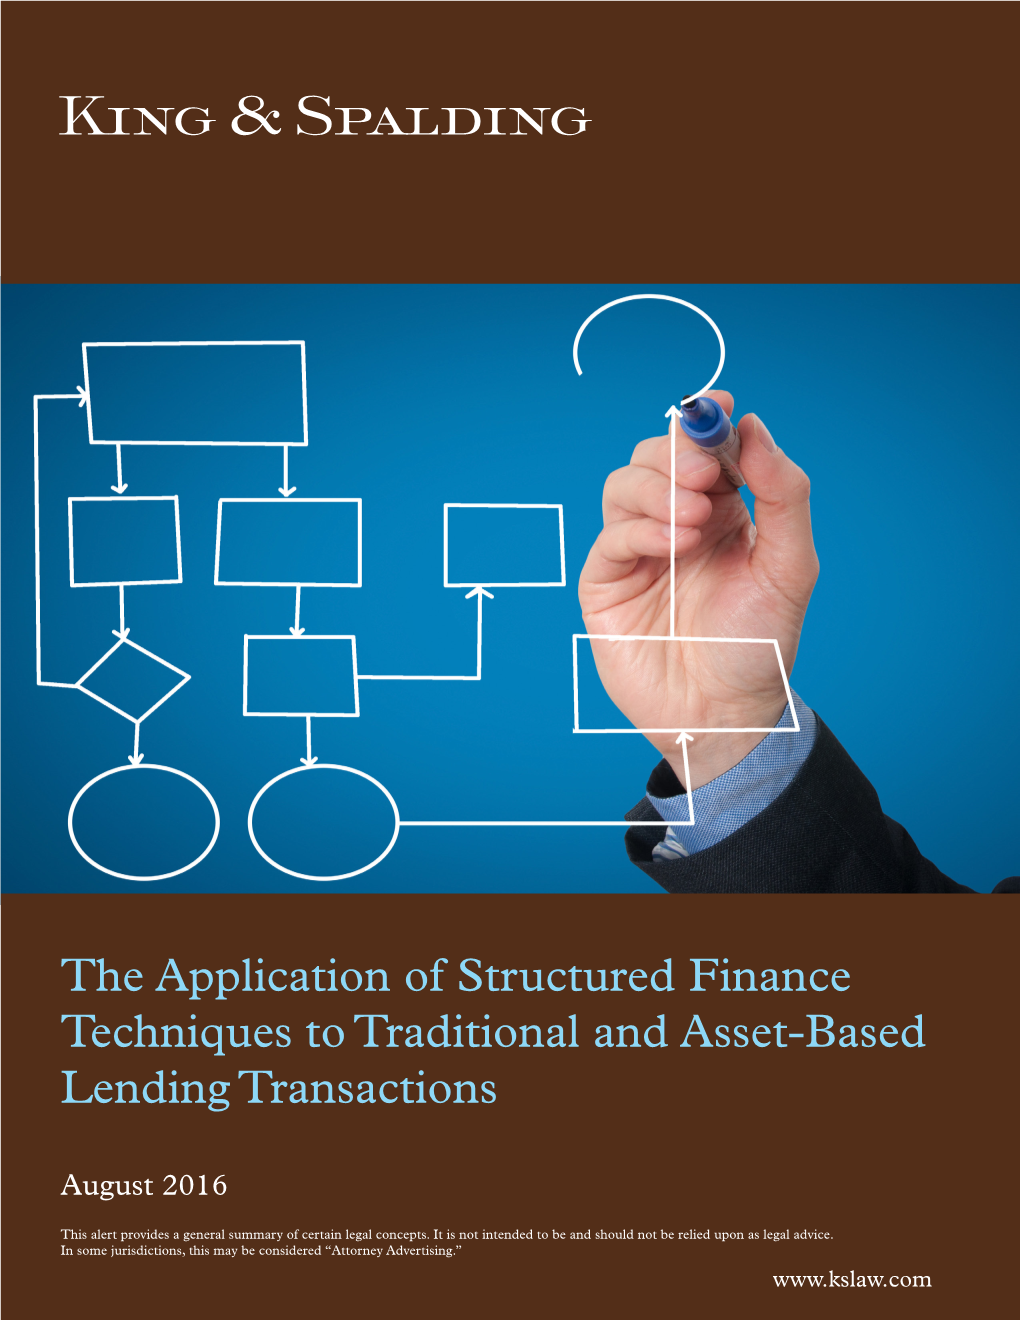 The Application of Structured Finance Techniques to Traditional and Asset-Based Lending Transactions